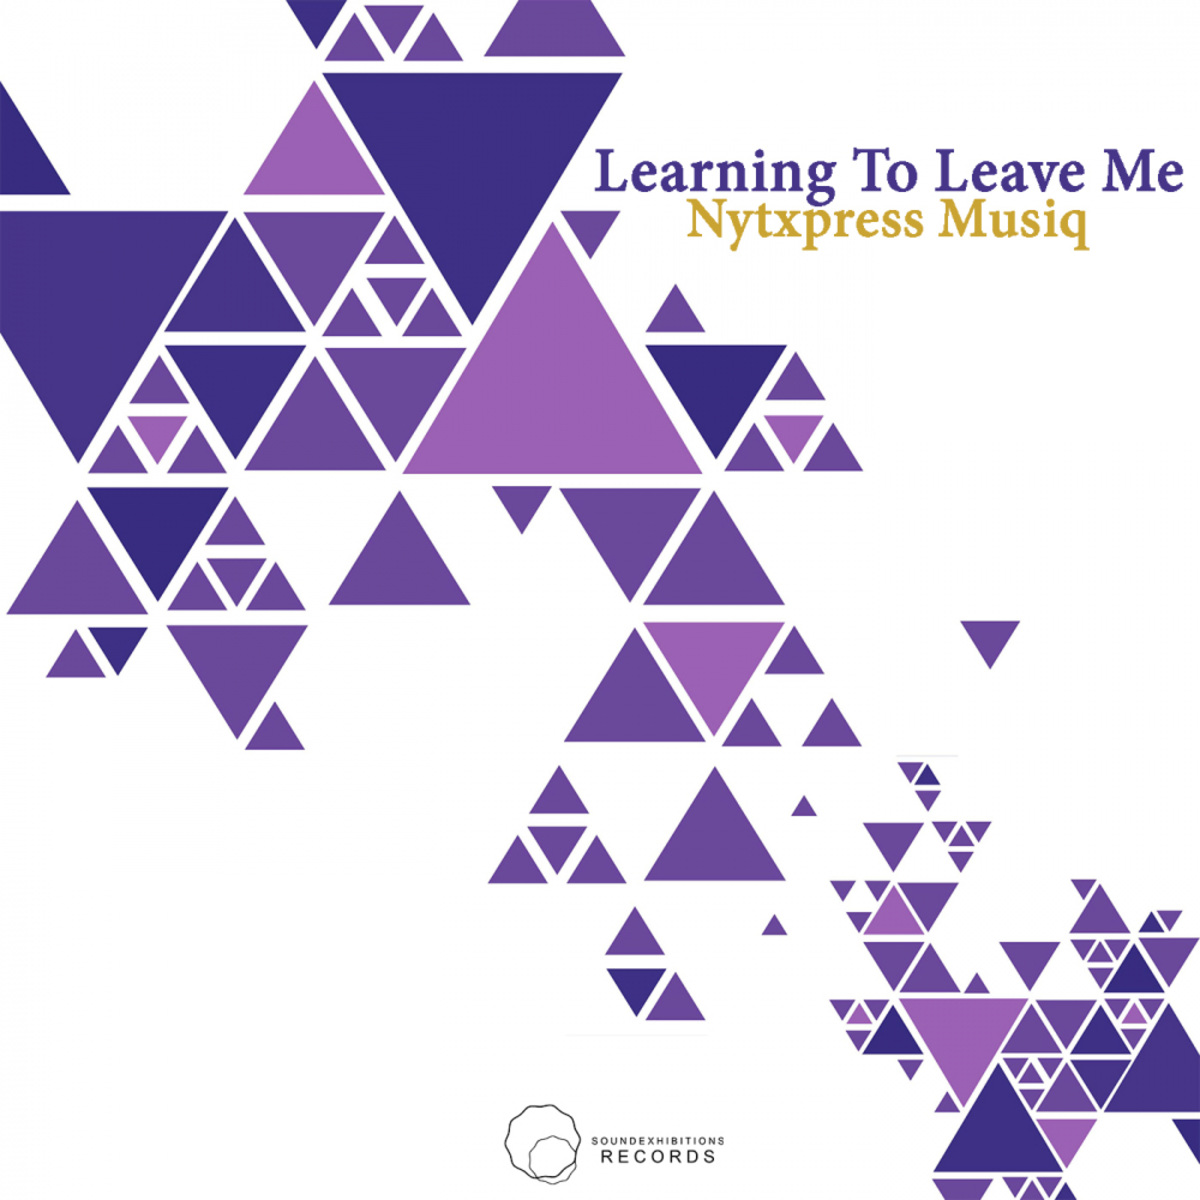 NytXpress Musiq - Learning To Leave Me / Sound-Exhibitions-Records